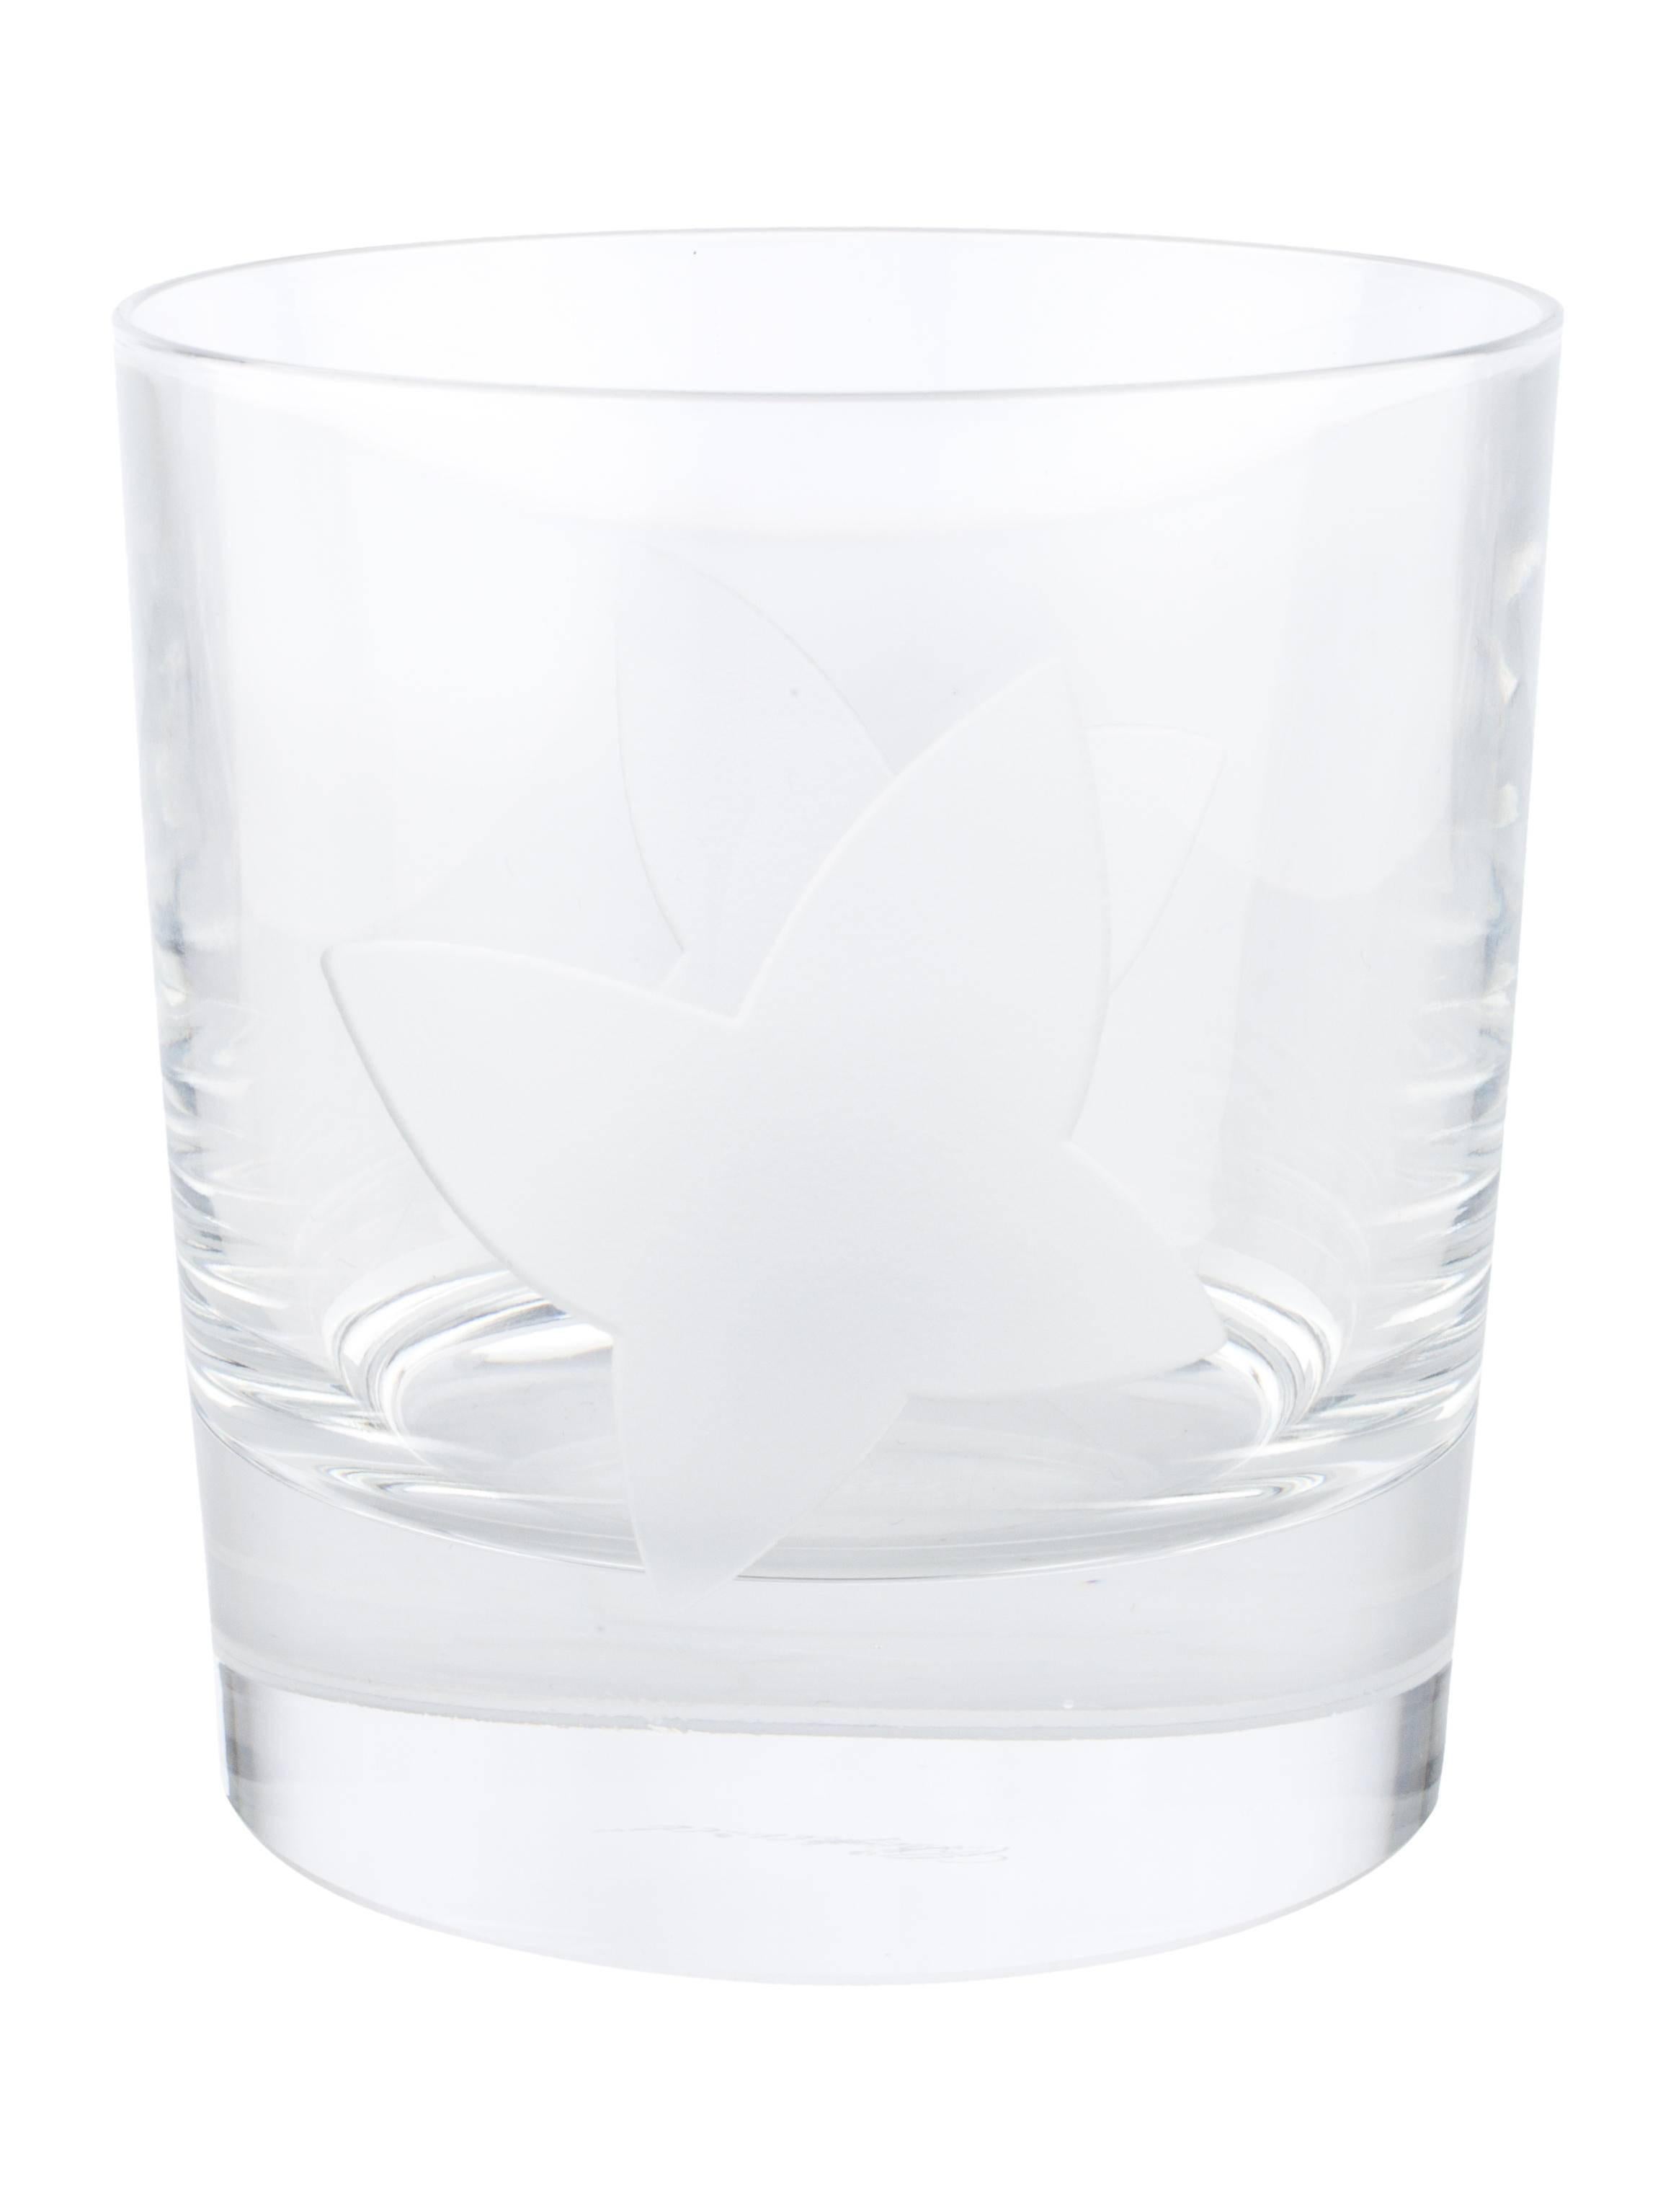 CURATOR'S NOTES

Crystal
Includes two glasses 
Height 3.75"
Diameter 3.5"
Includes original Cartier packaging 